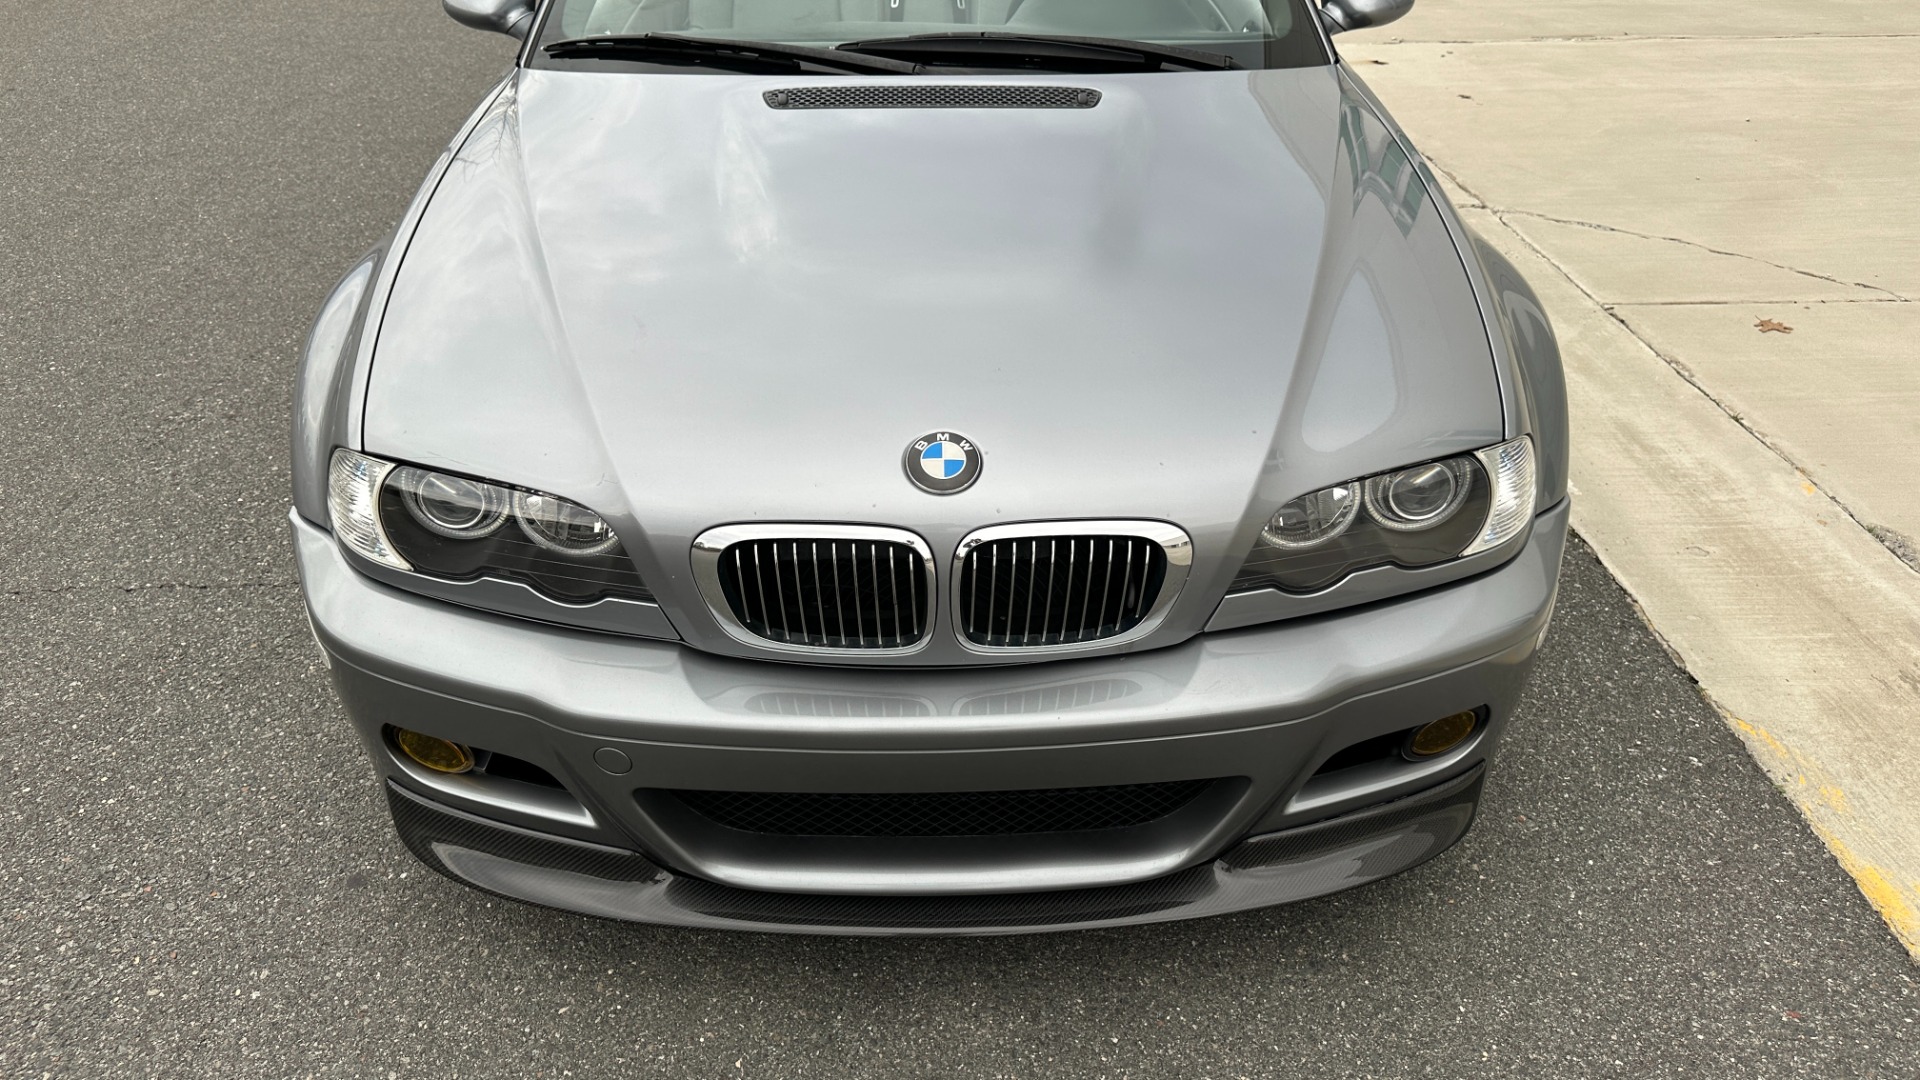 Used 2006 BMW 3 Series M3 CONVERTIBLE / SMG AUTO / LEATHER / INLINE 6CYL / CARBON FIBER for sale Sold at Formula Imports in Charlotte NC 28227 43